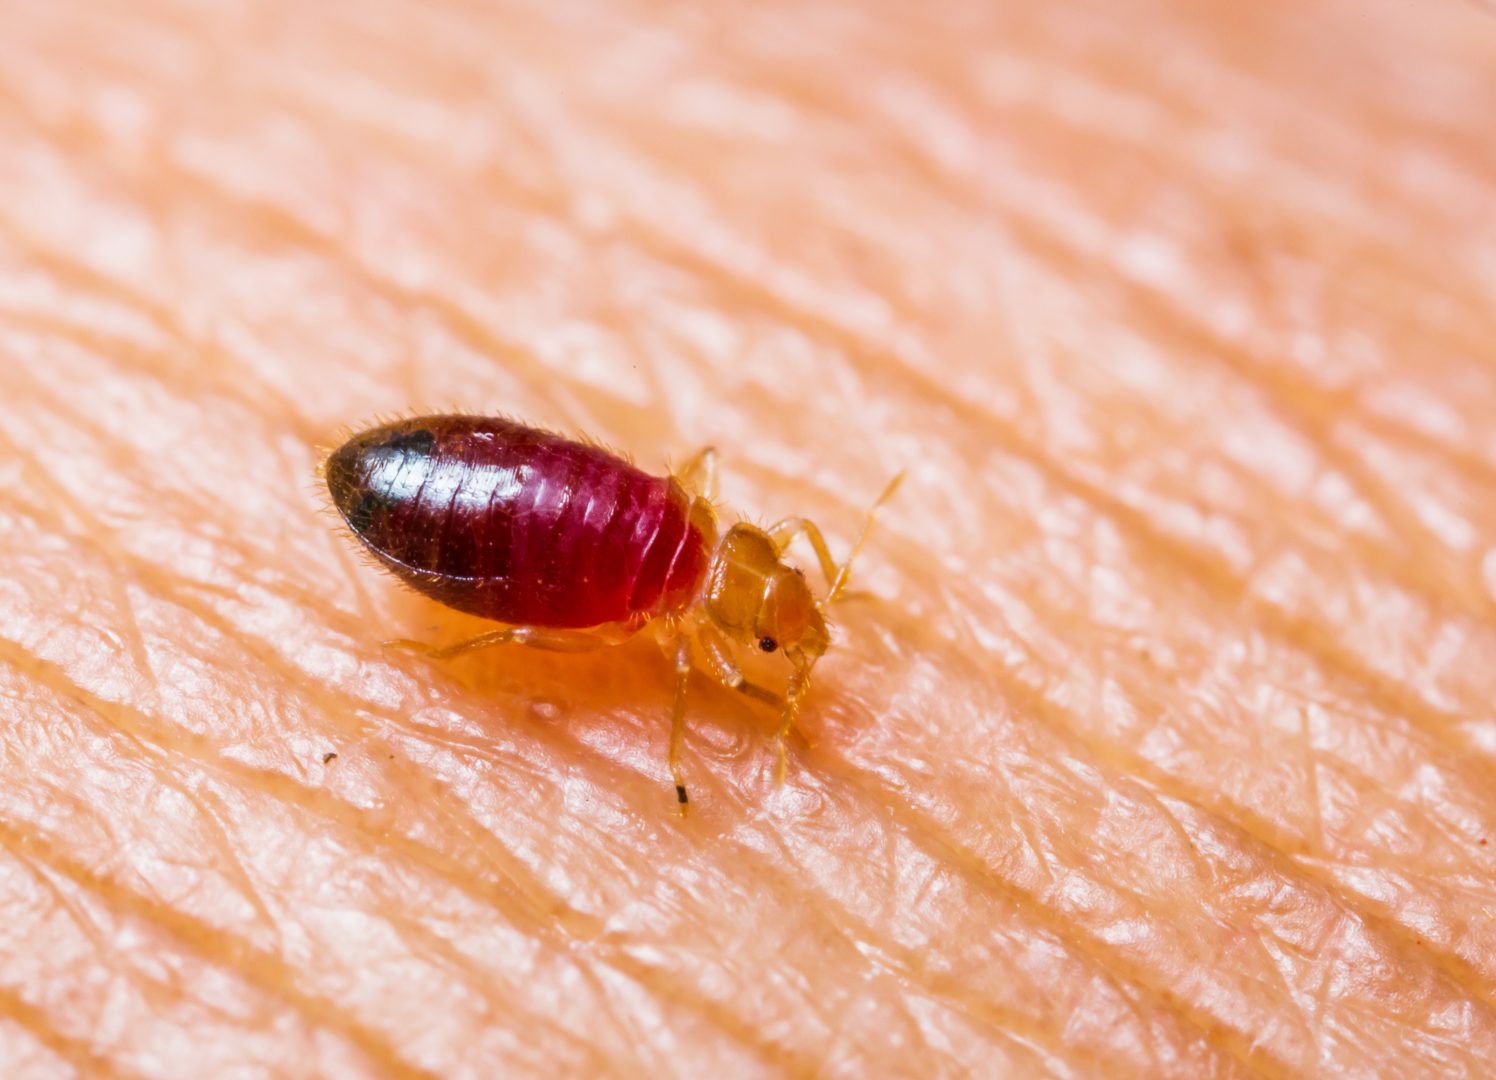 What do bed bugs look like? Spokane bed bug treatment - Croach